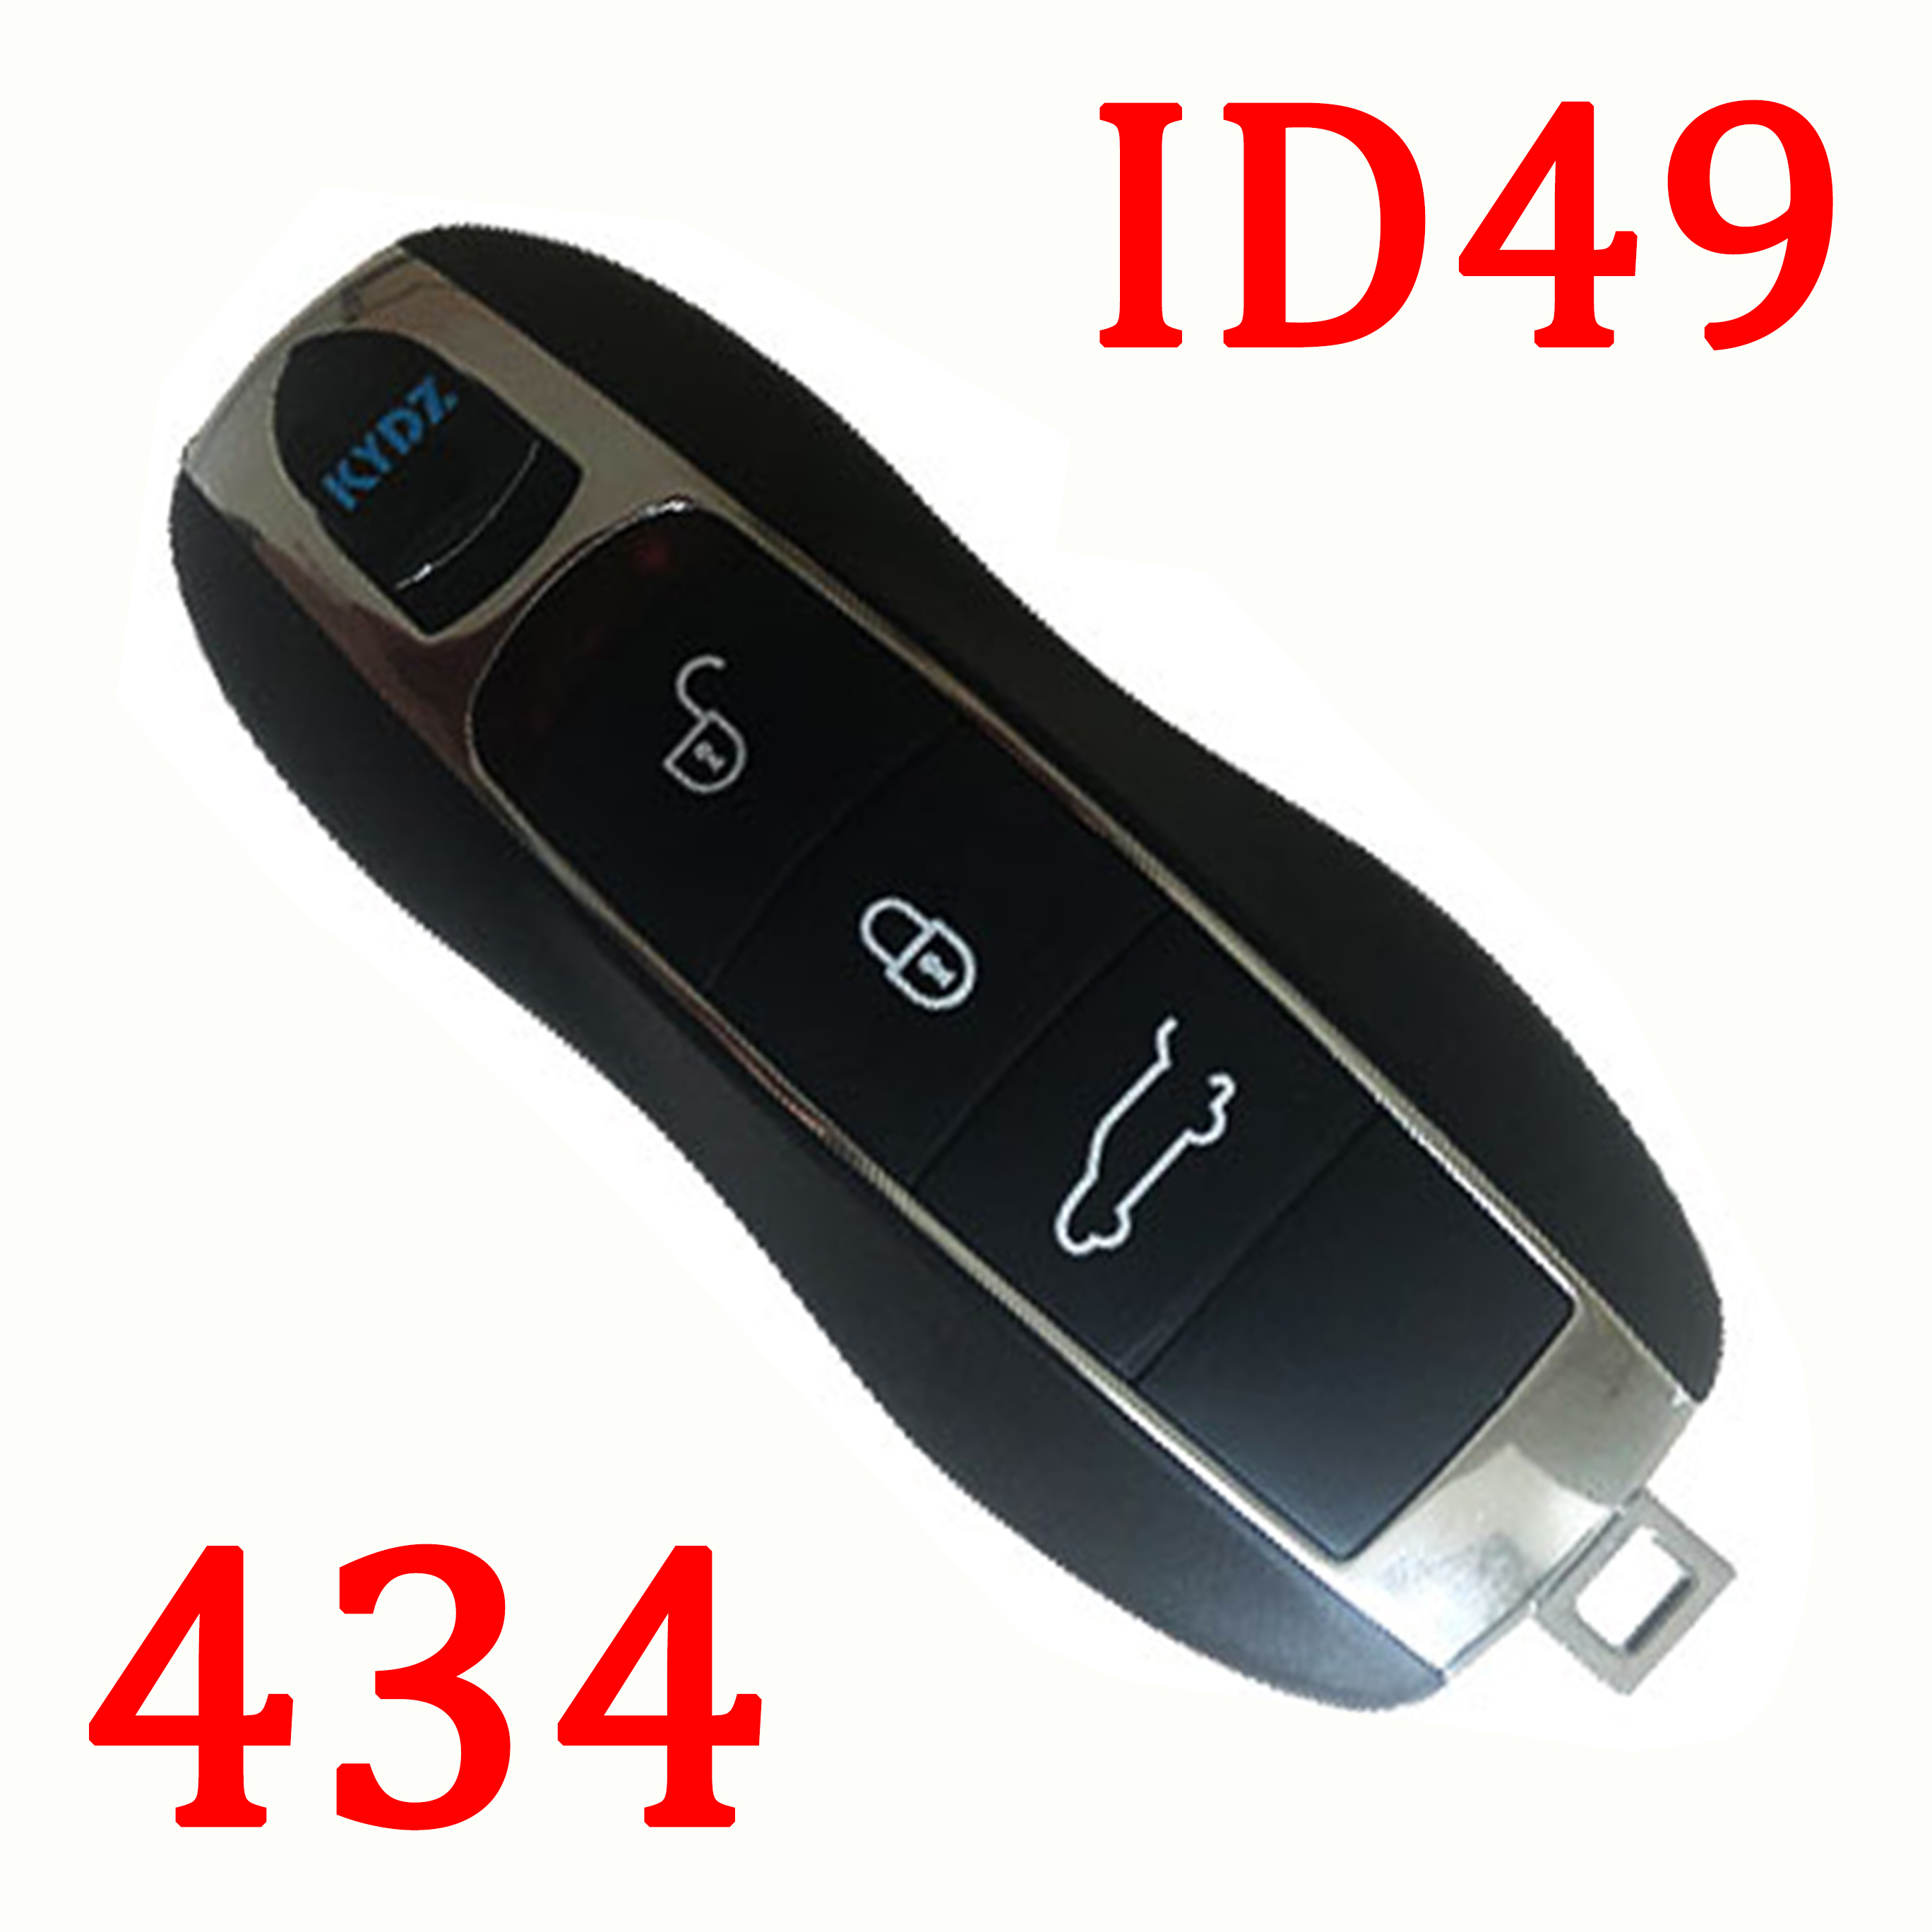 3 Buttons 434 MHz Remote Key for Porsche ID49 